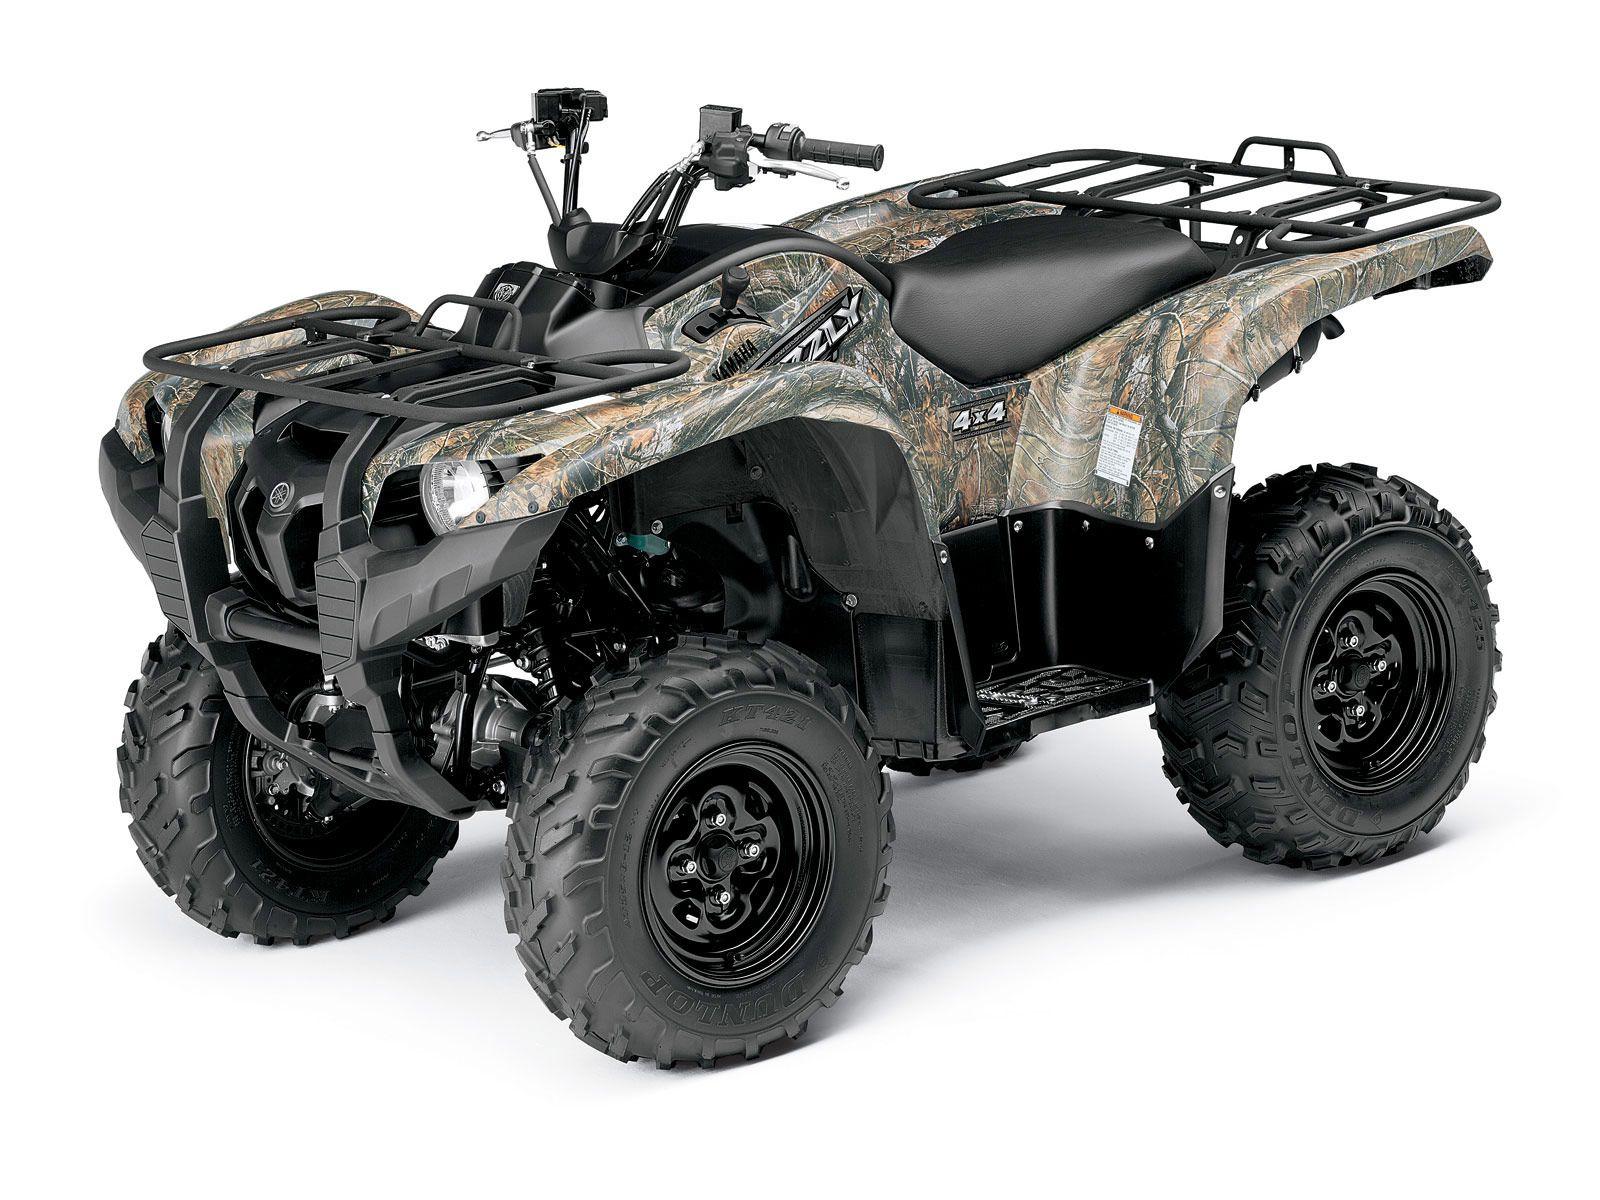 Yamaha Grizzly 700 Fi 4x4. Download Wallpaper